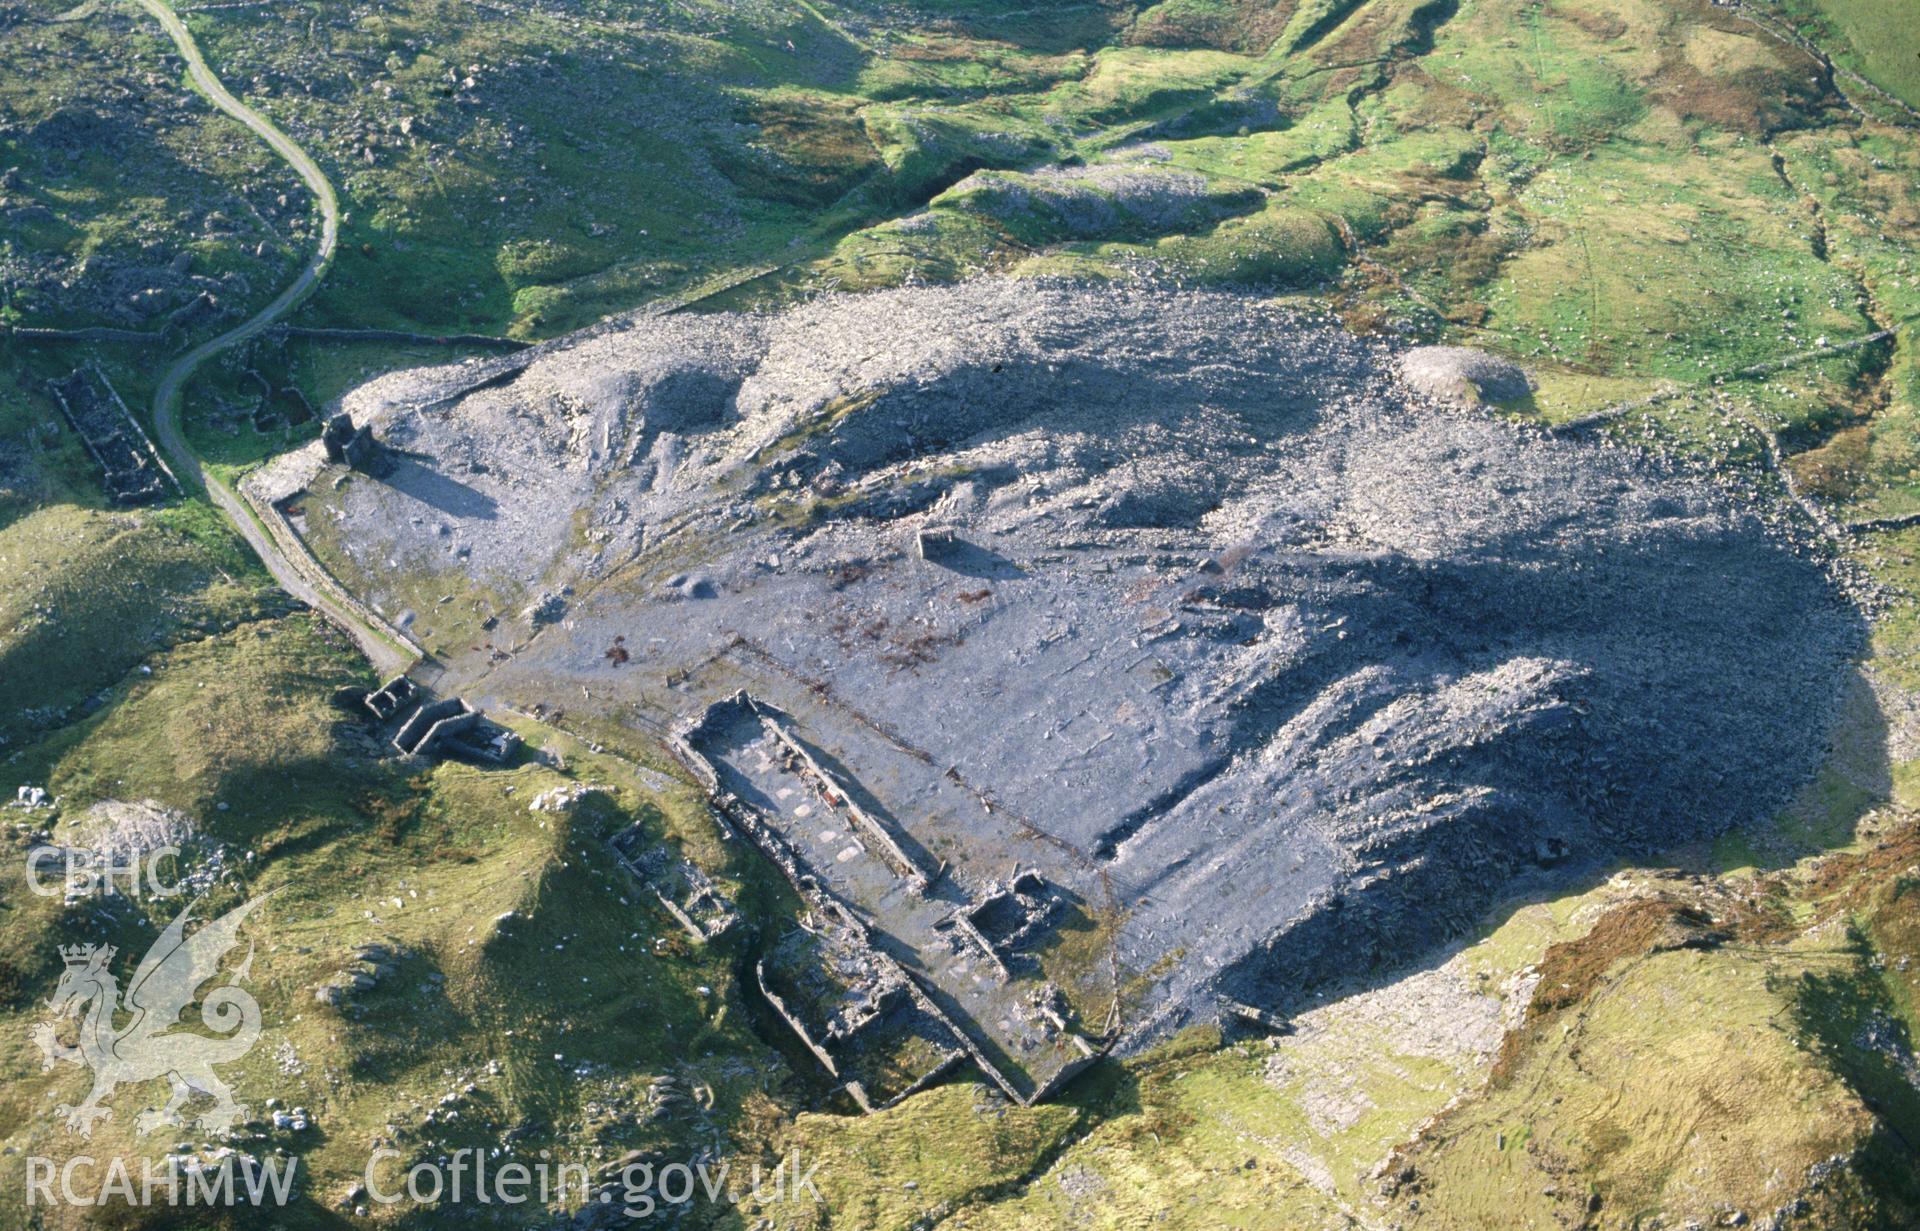 Slide of RCAHMW colour oblique aerial photograph of Croesor Slate Quarry, taken by C.R. Musson, 9/10/1994.